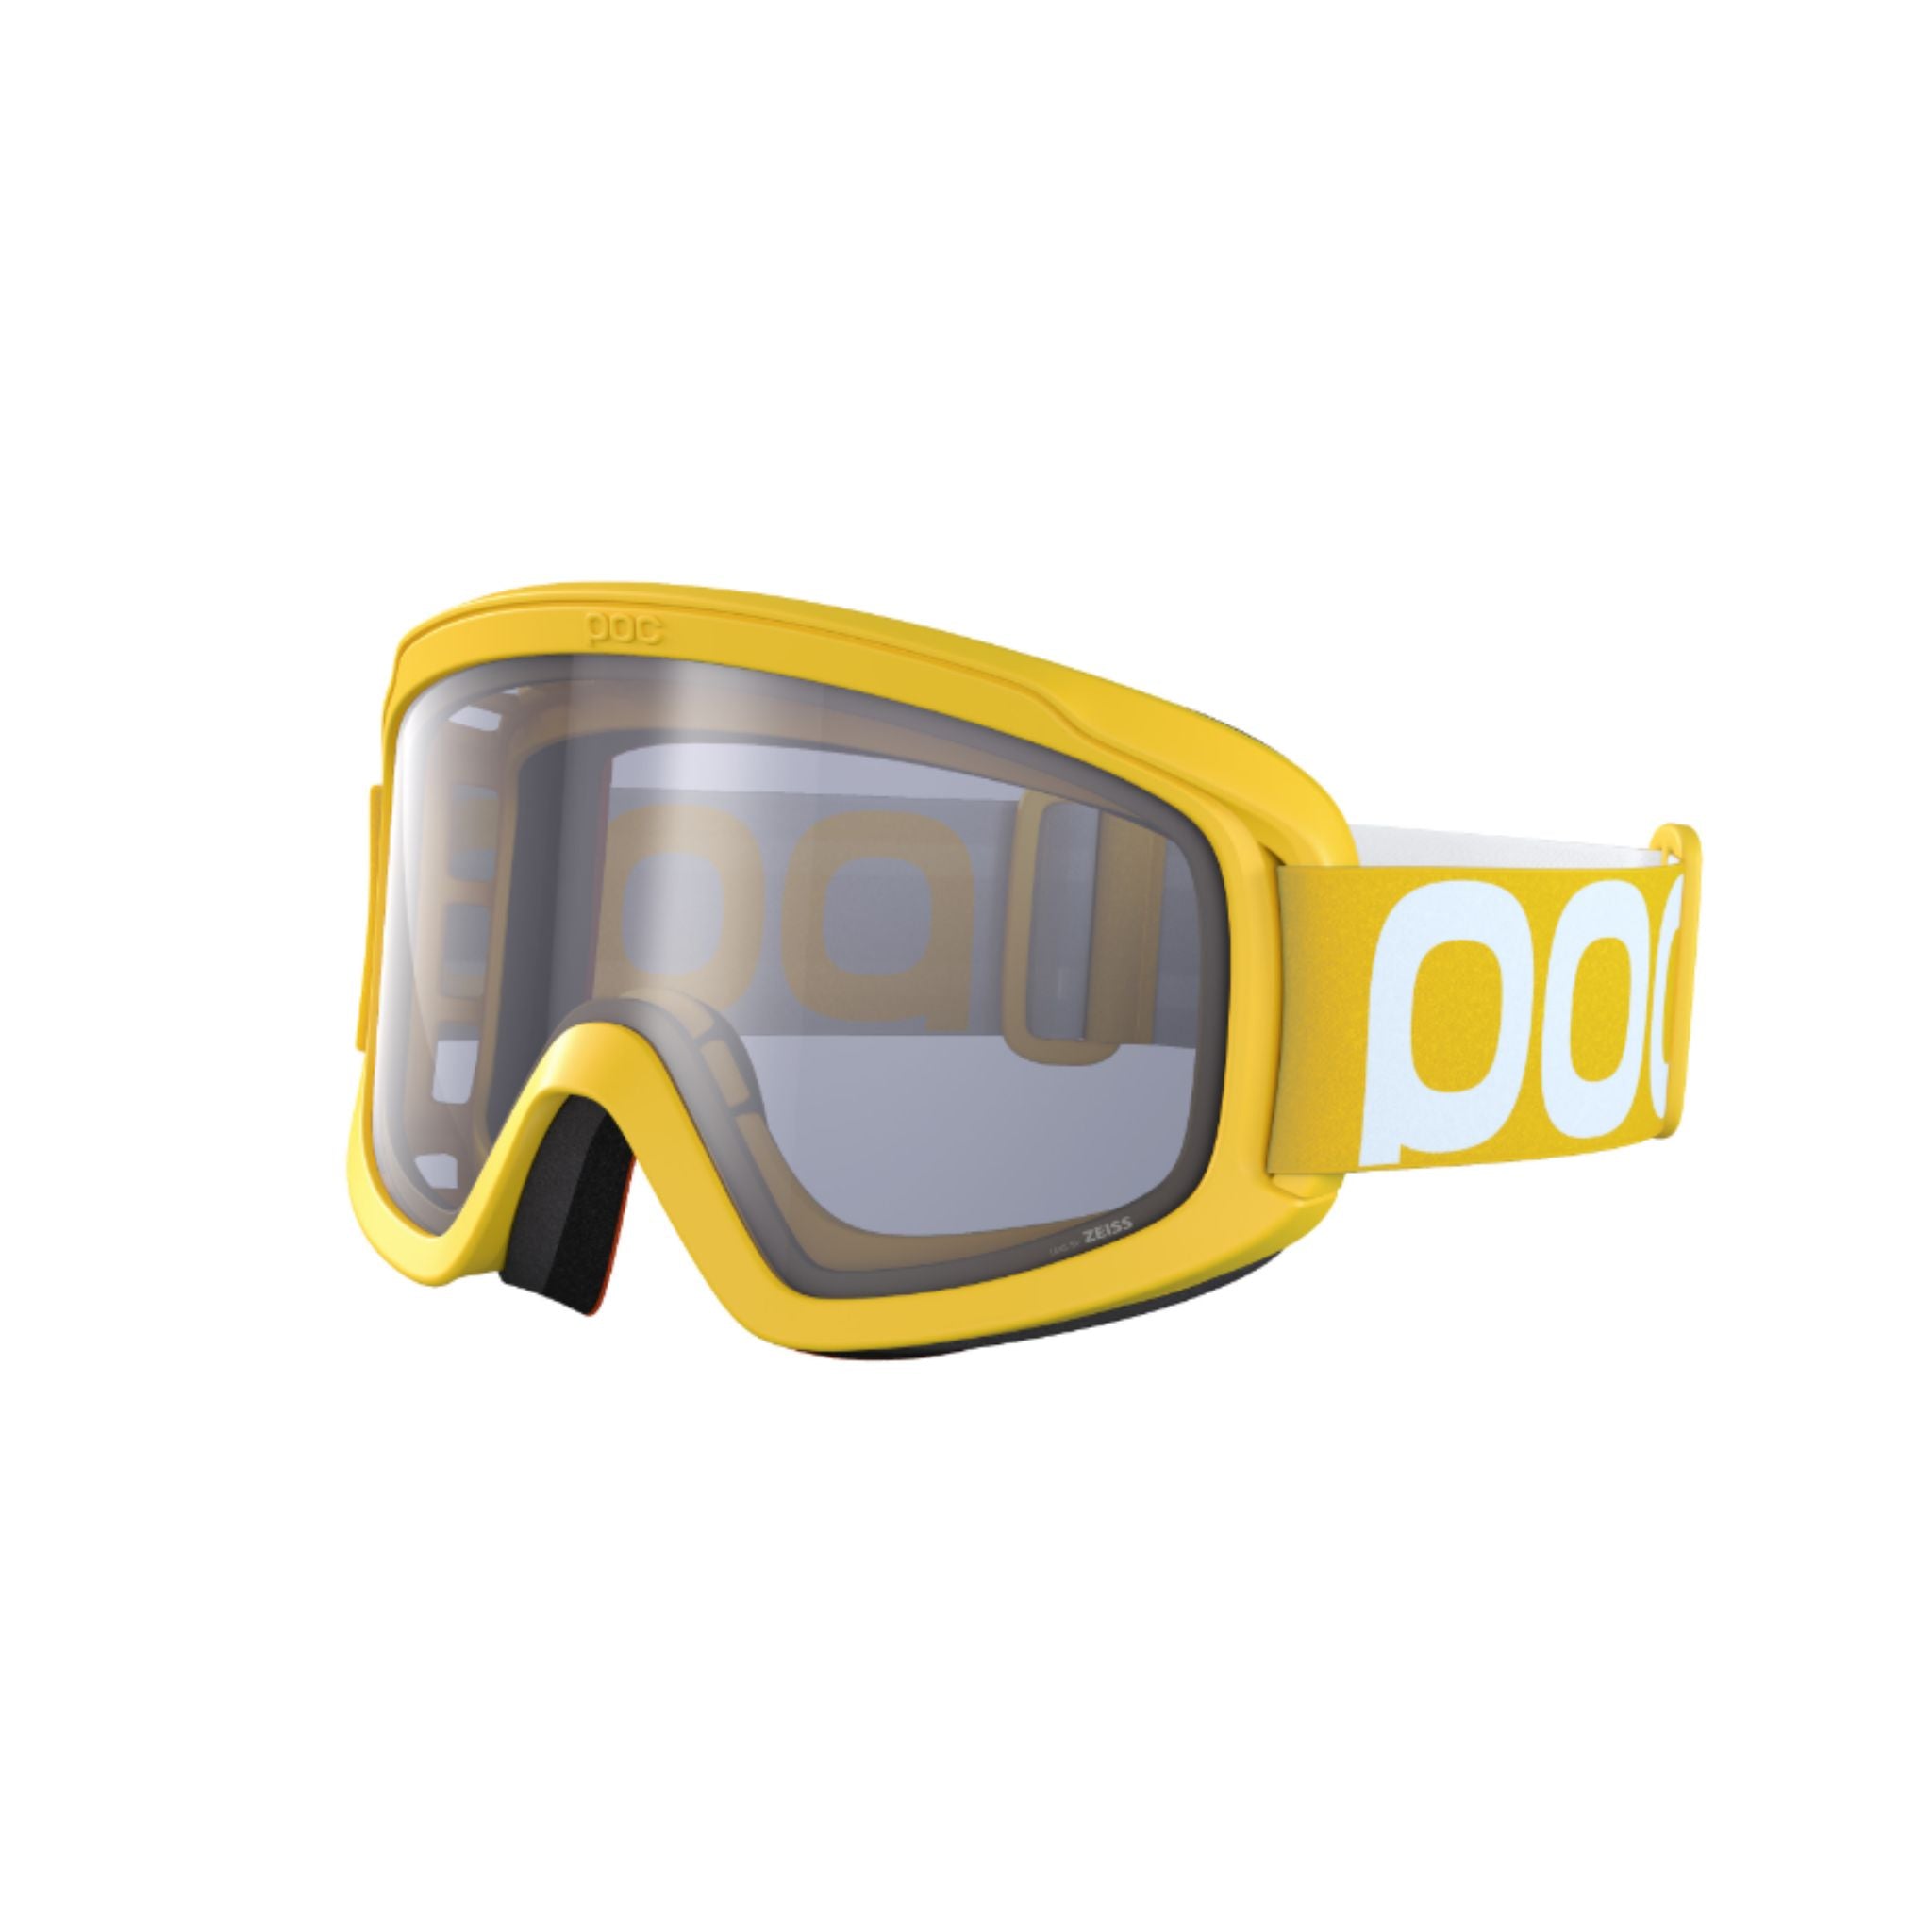 POC Opsin Youth Goggles